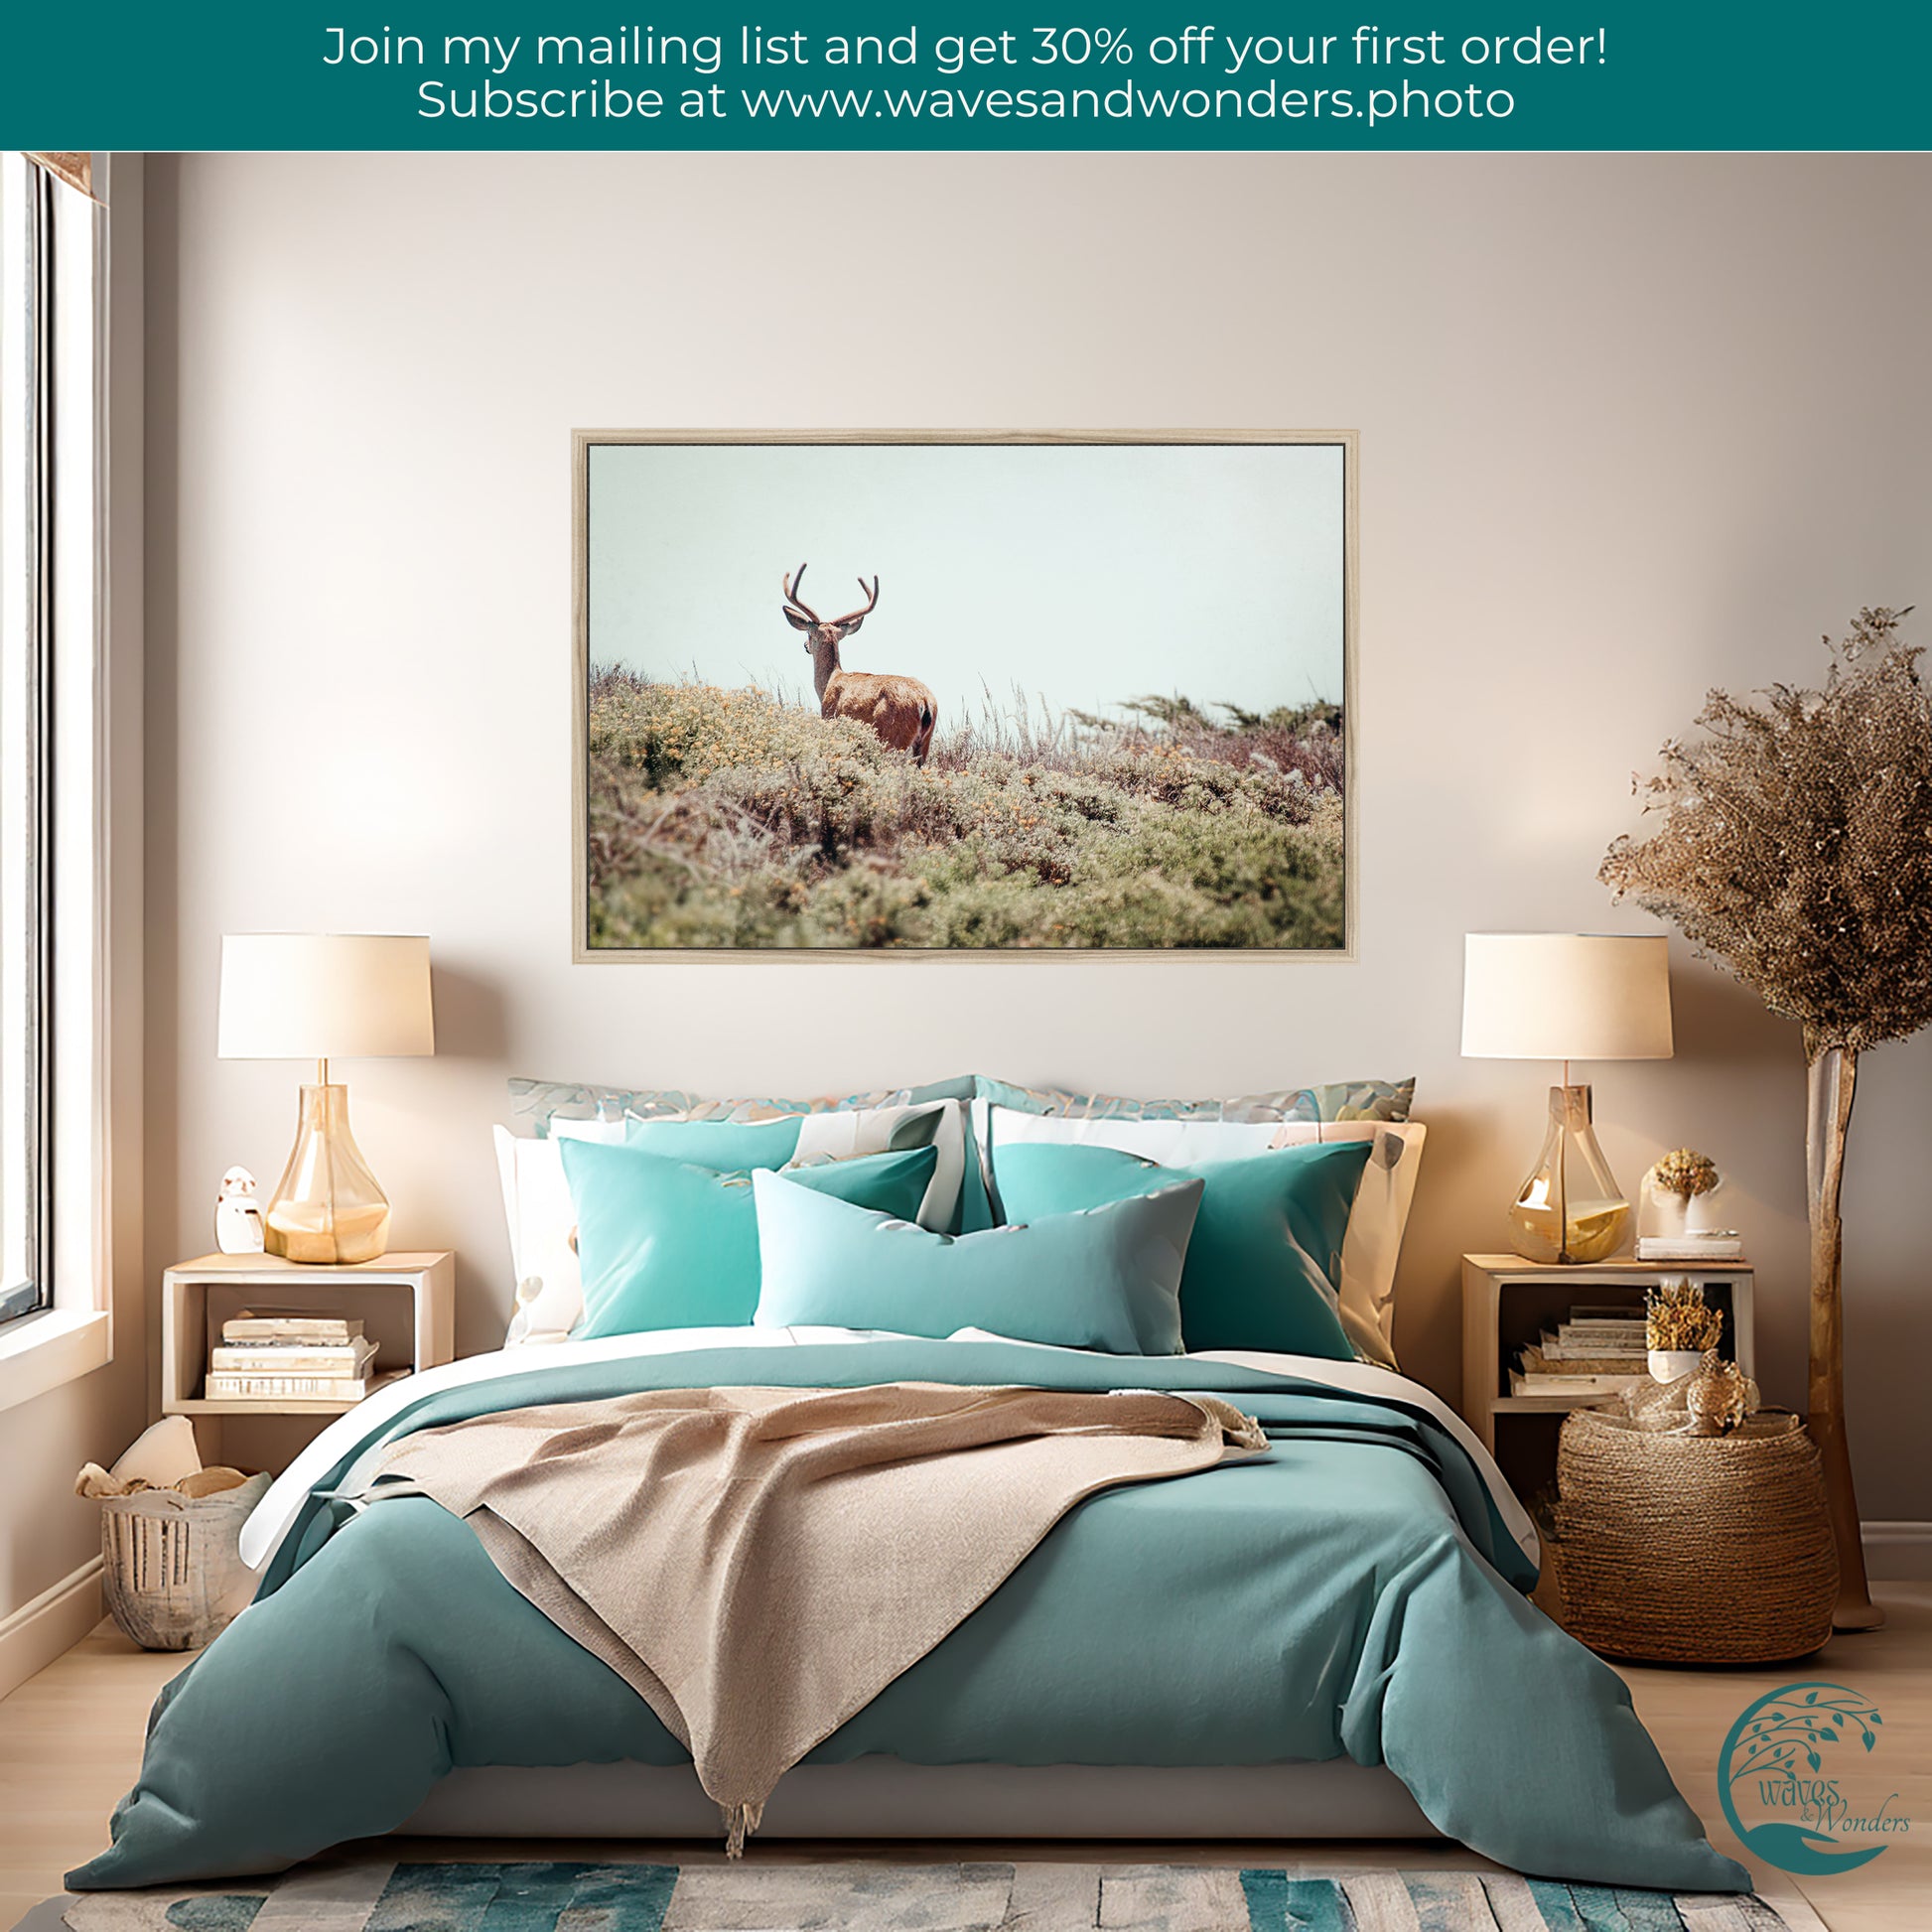 a bed with a blue comforter and a picture of a deer on the wall